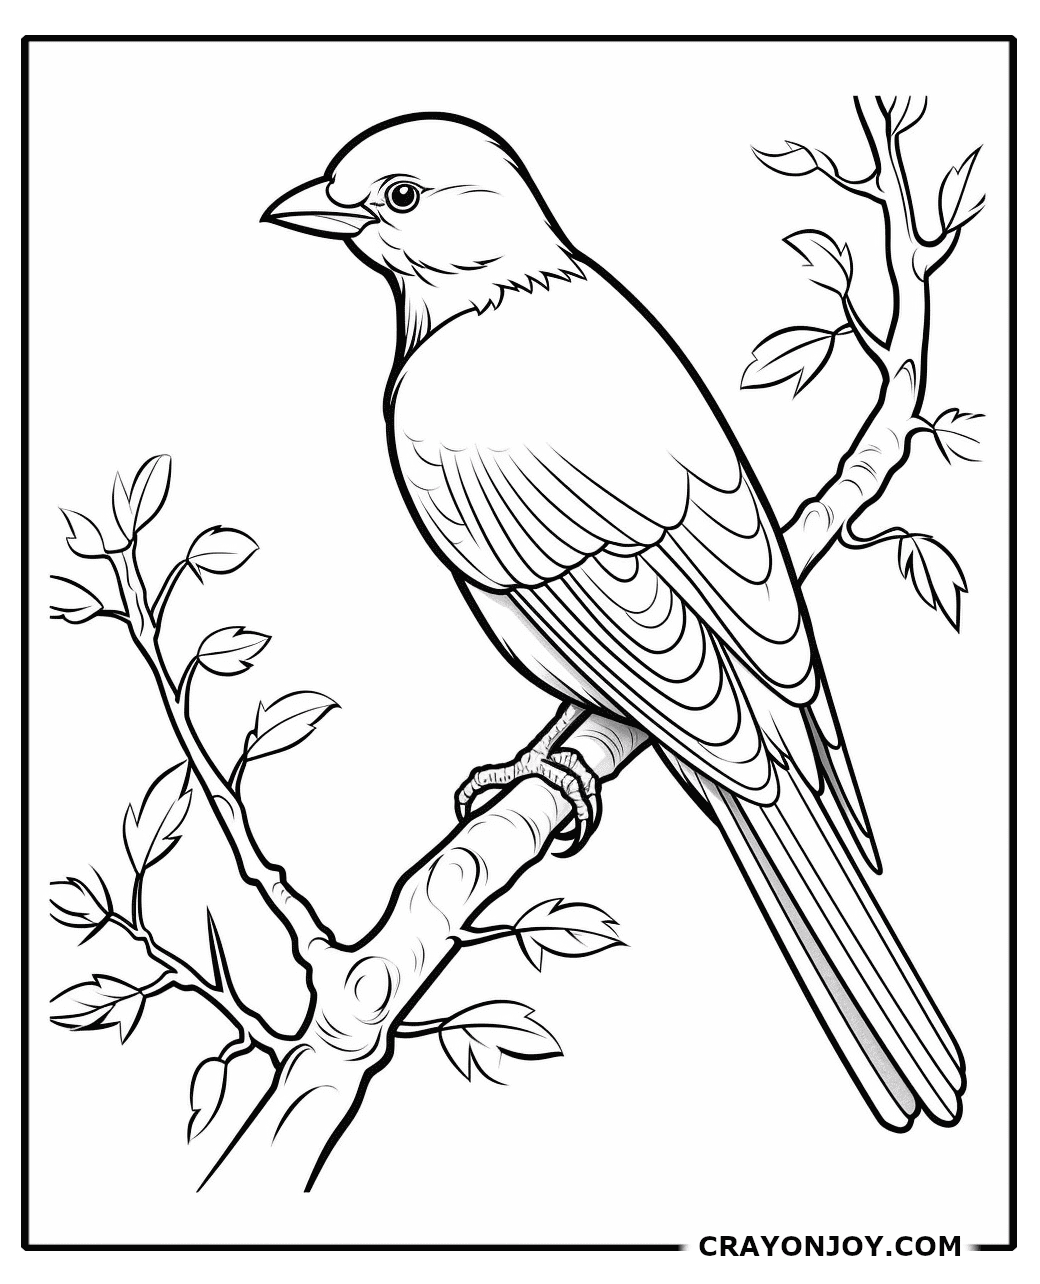 Bowerbird Coloring Pages: Free Printable Sheets for Kids